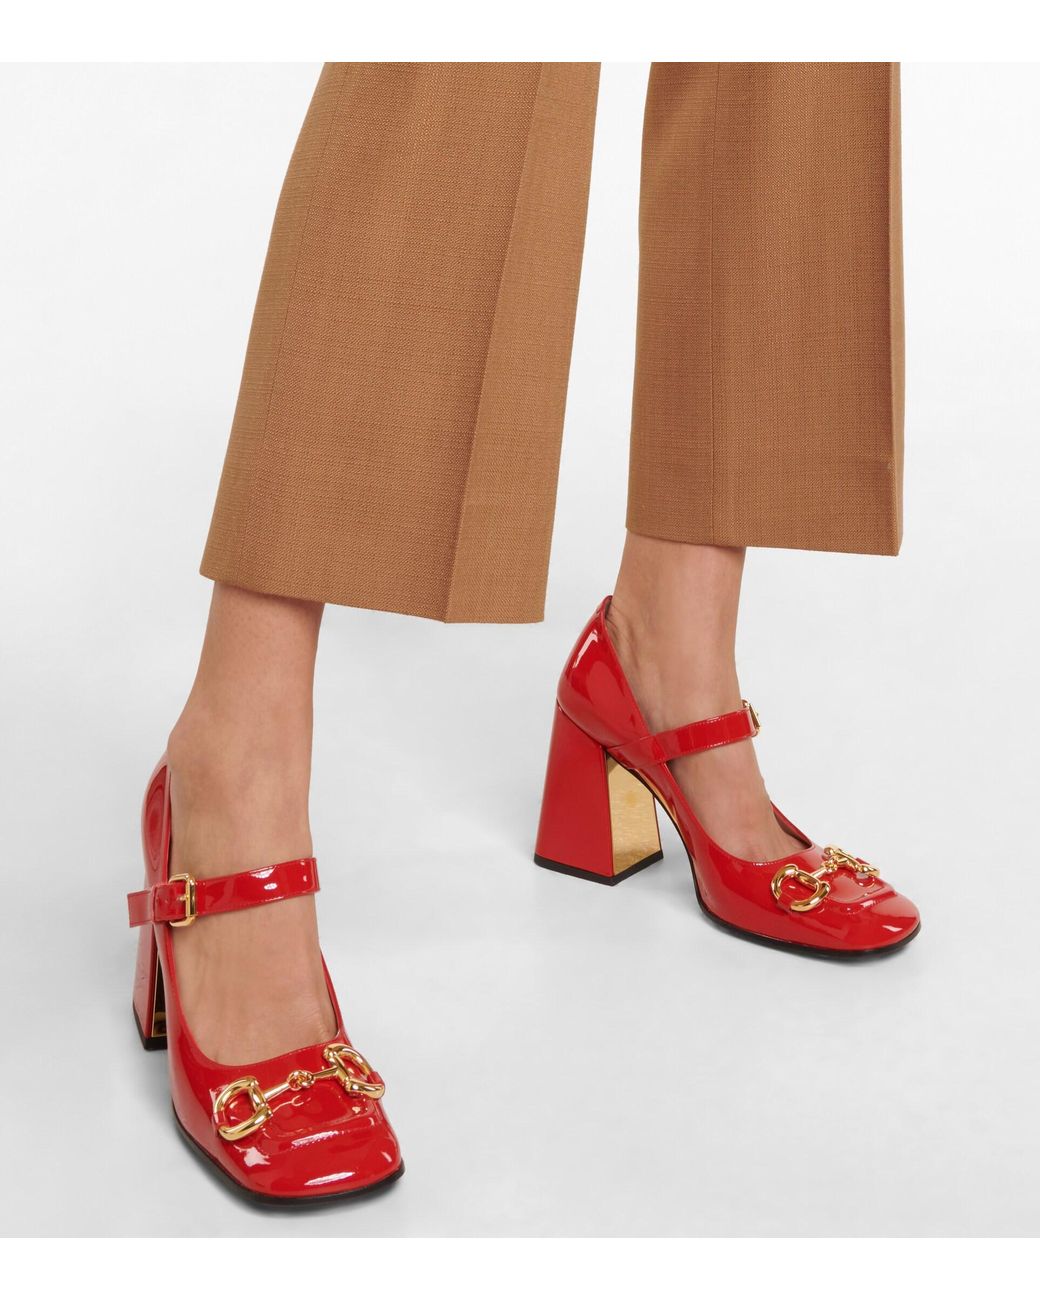 Gucci Horsebit Leather Mary Jane Pumps in Red | Lyst